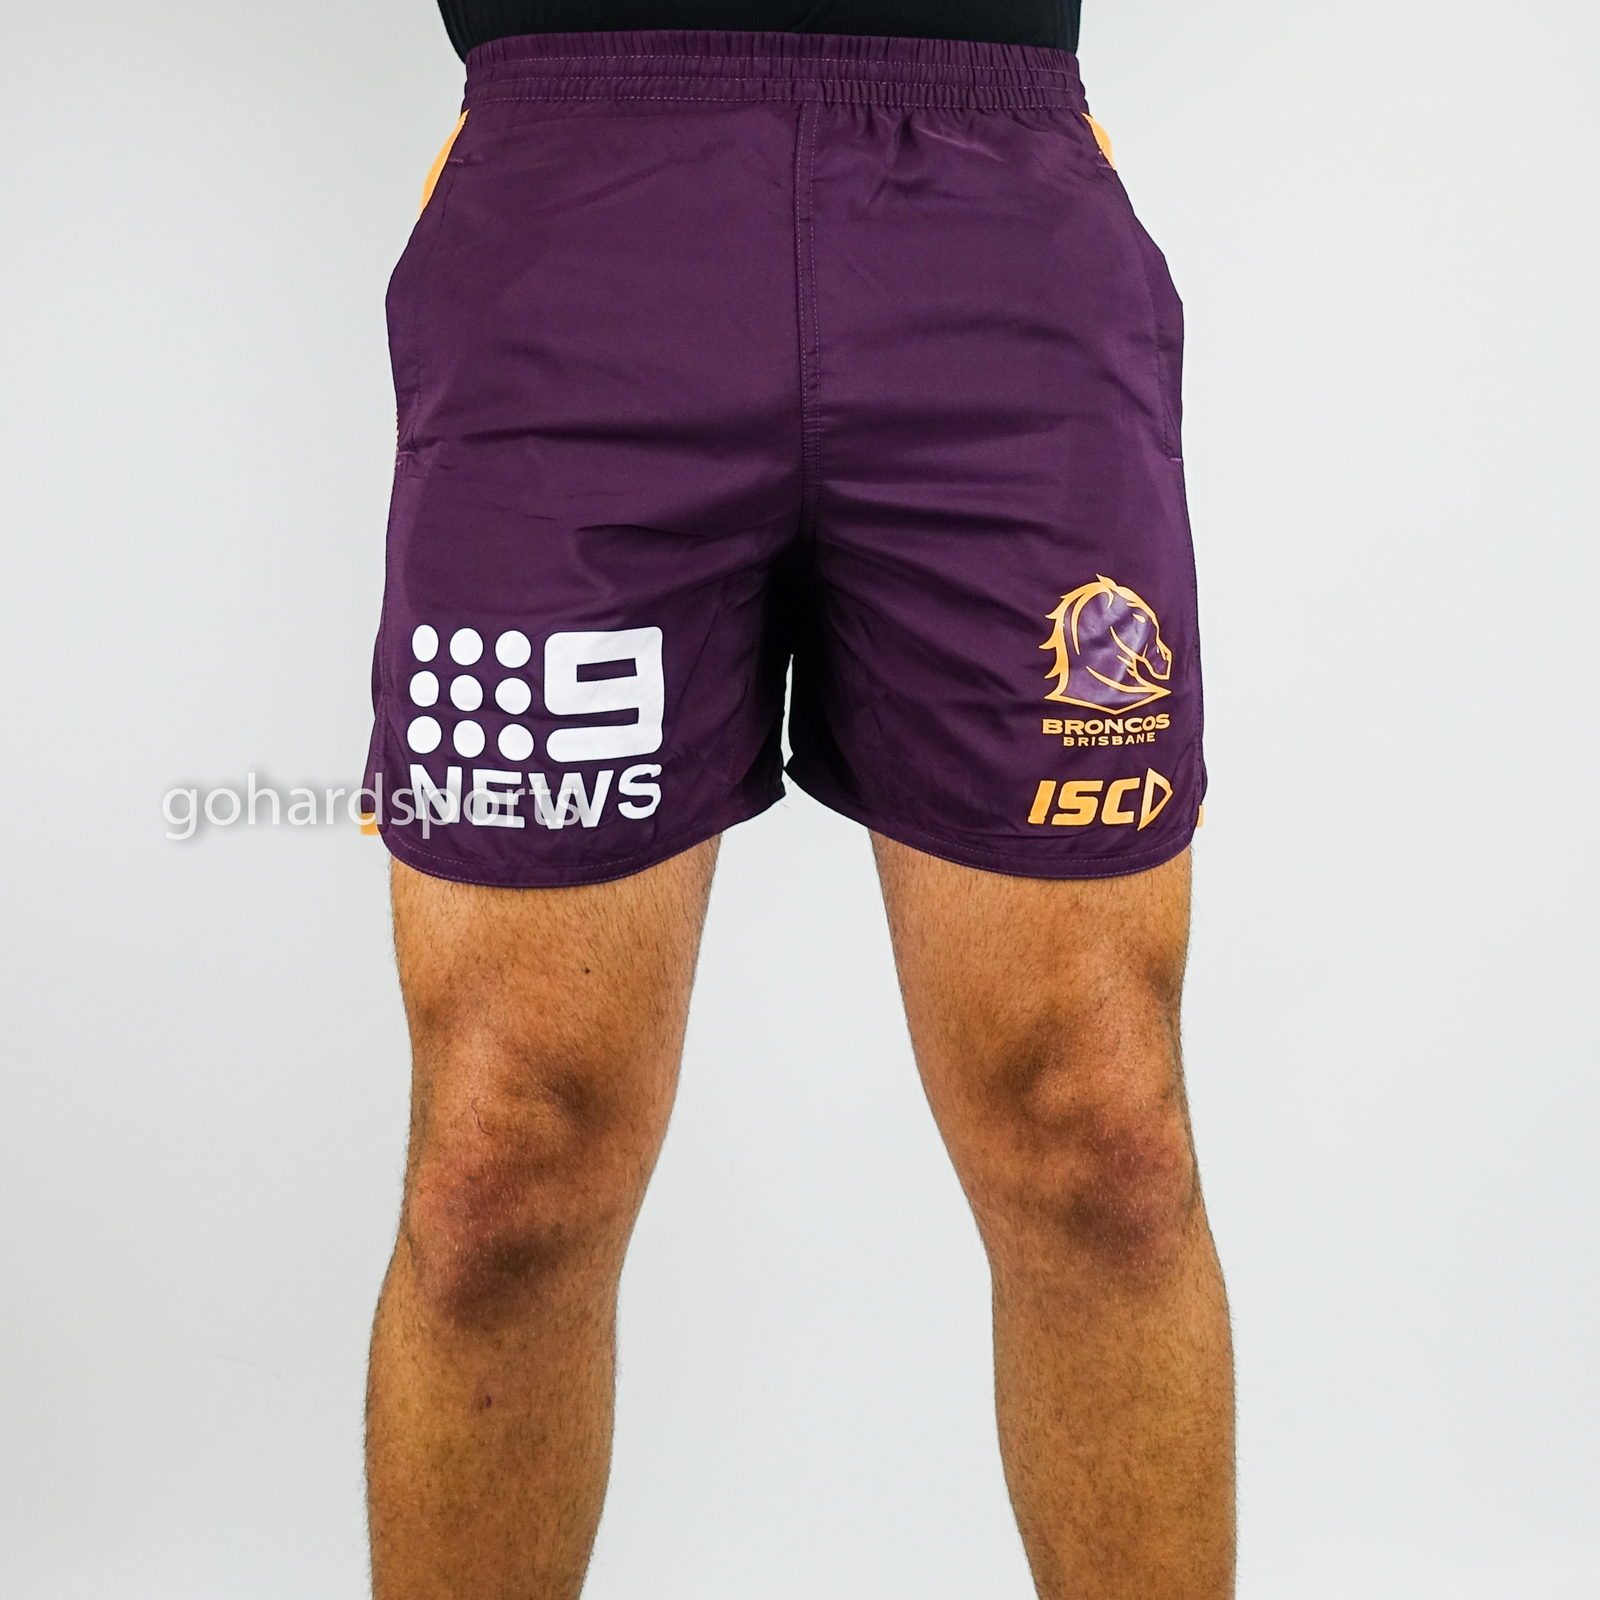 Details about   Wests Tigers 2019 NRL Training Shorts Sizes Adults and Kids Sizes BNWT 